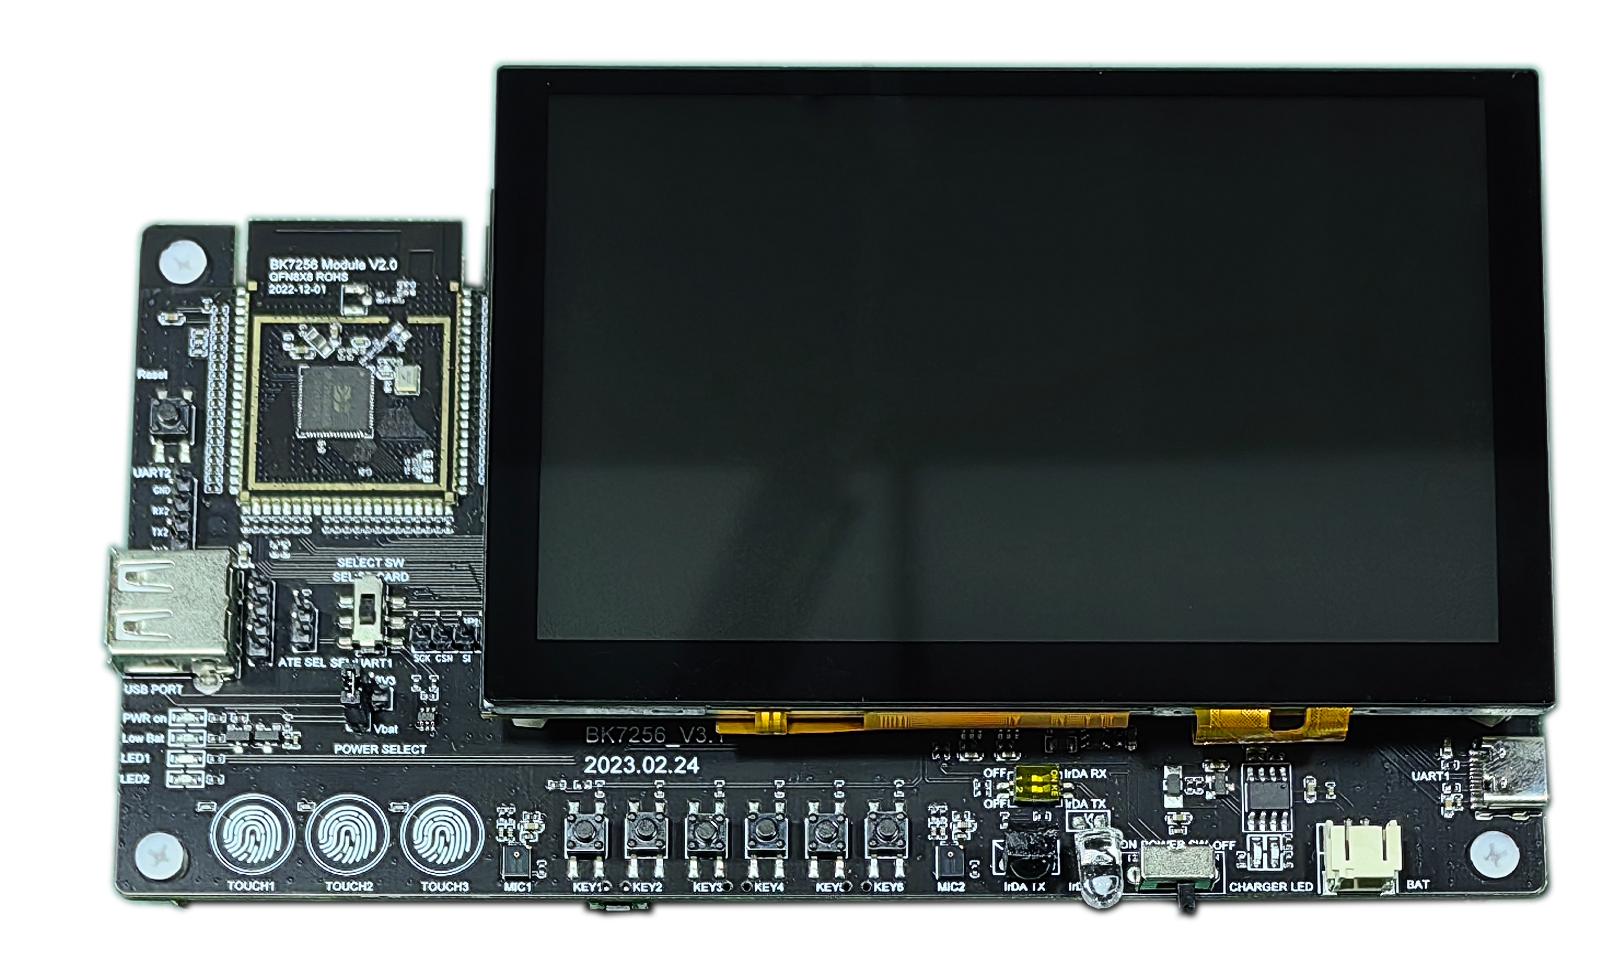 BK7256 EVB with 5-inch LCD